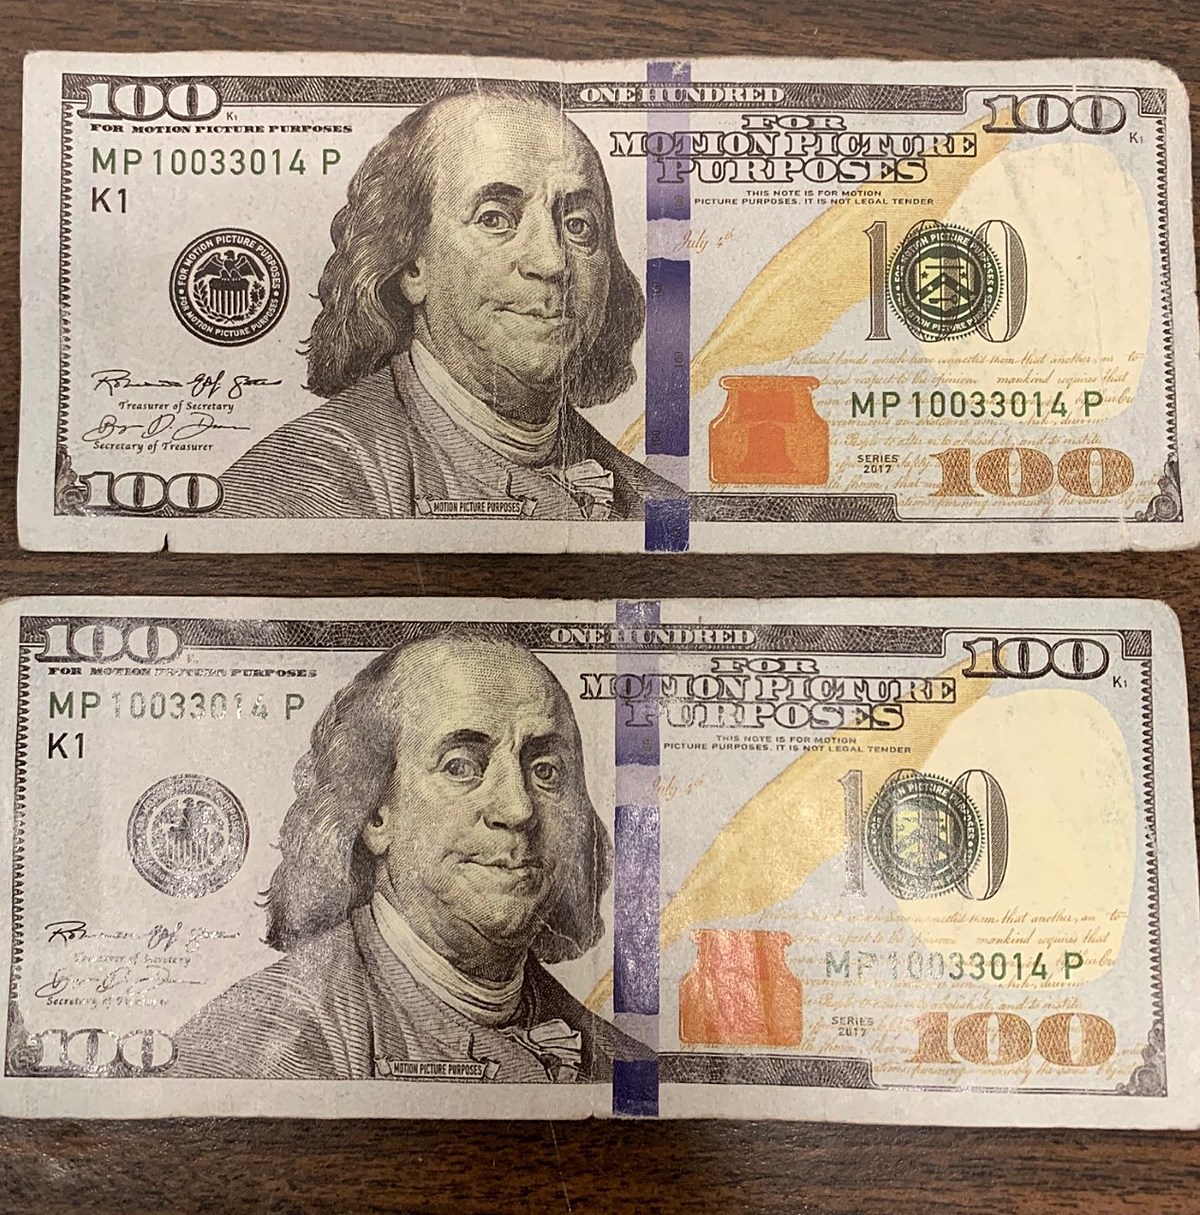 Counterfeit Cash Passed in Cortland County